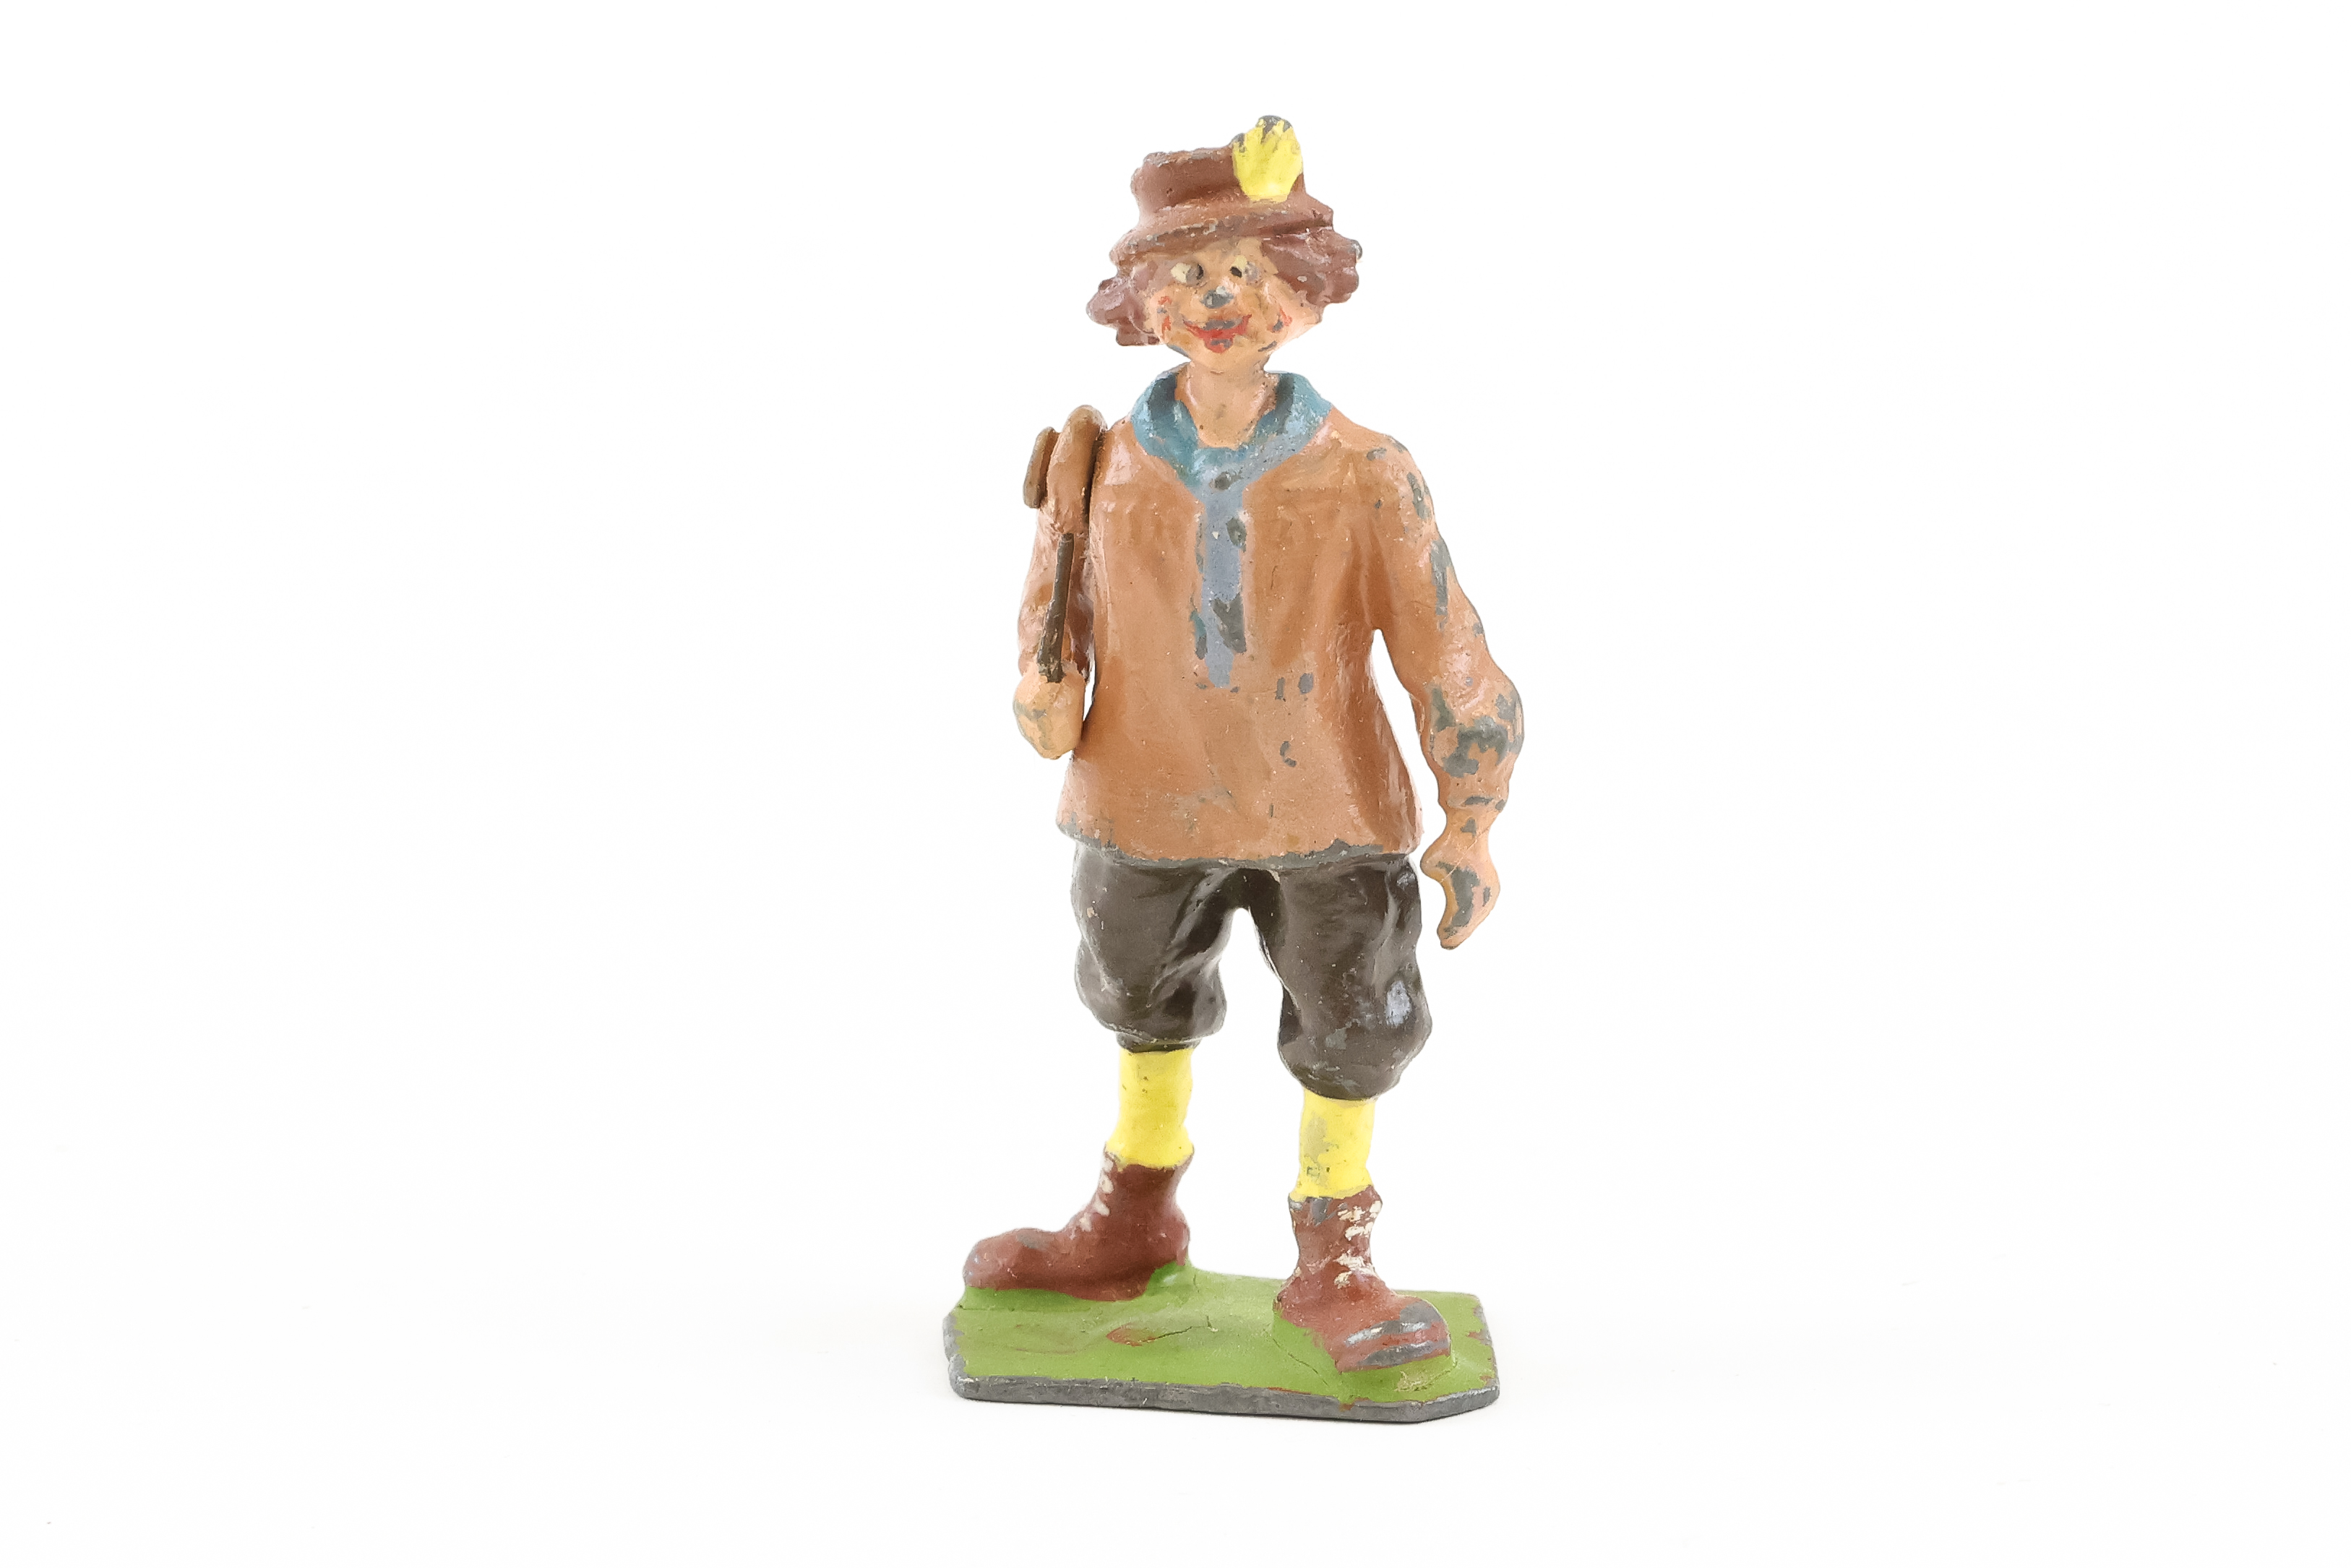 A scarce Britains lead figure of "the village idiot", dressed in light poink top, blue scarf,